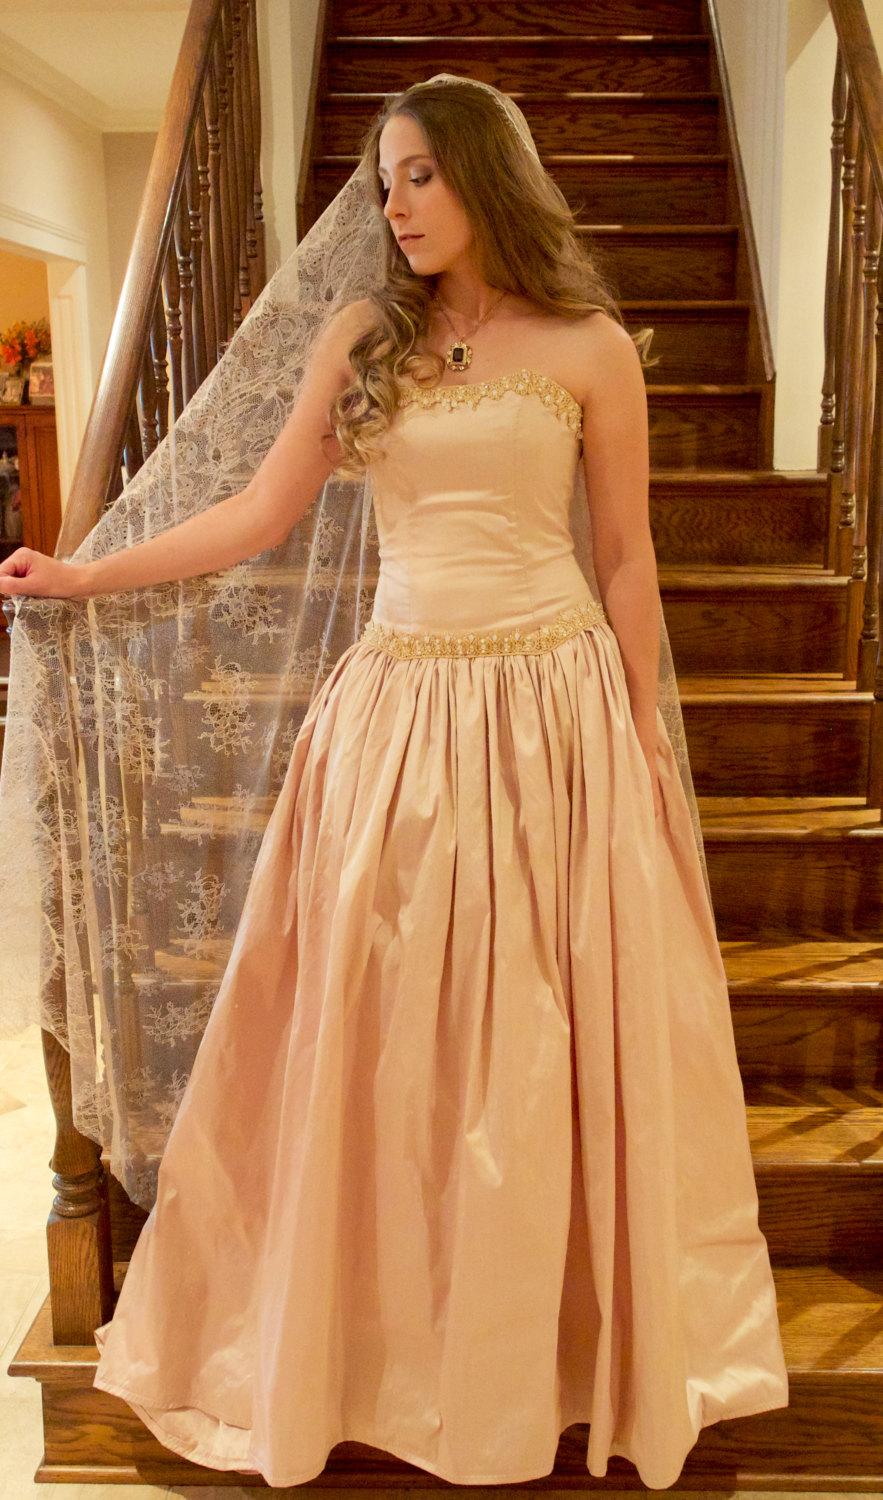 Mariage - Rose Gold Silk Ballgown Wedding Dress, Gold Lace & Crystal Buttons, Affordable and Comfortable Wedding Dress, Vintage inspired (US SIZE 6/8)